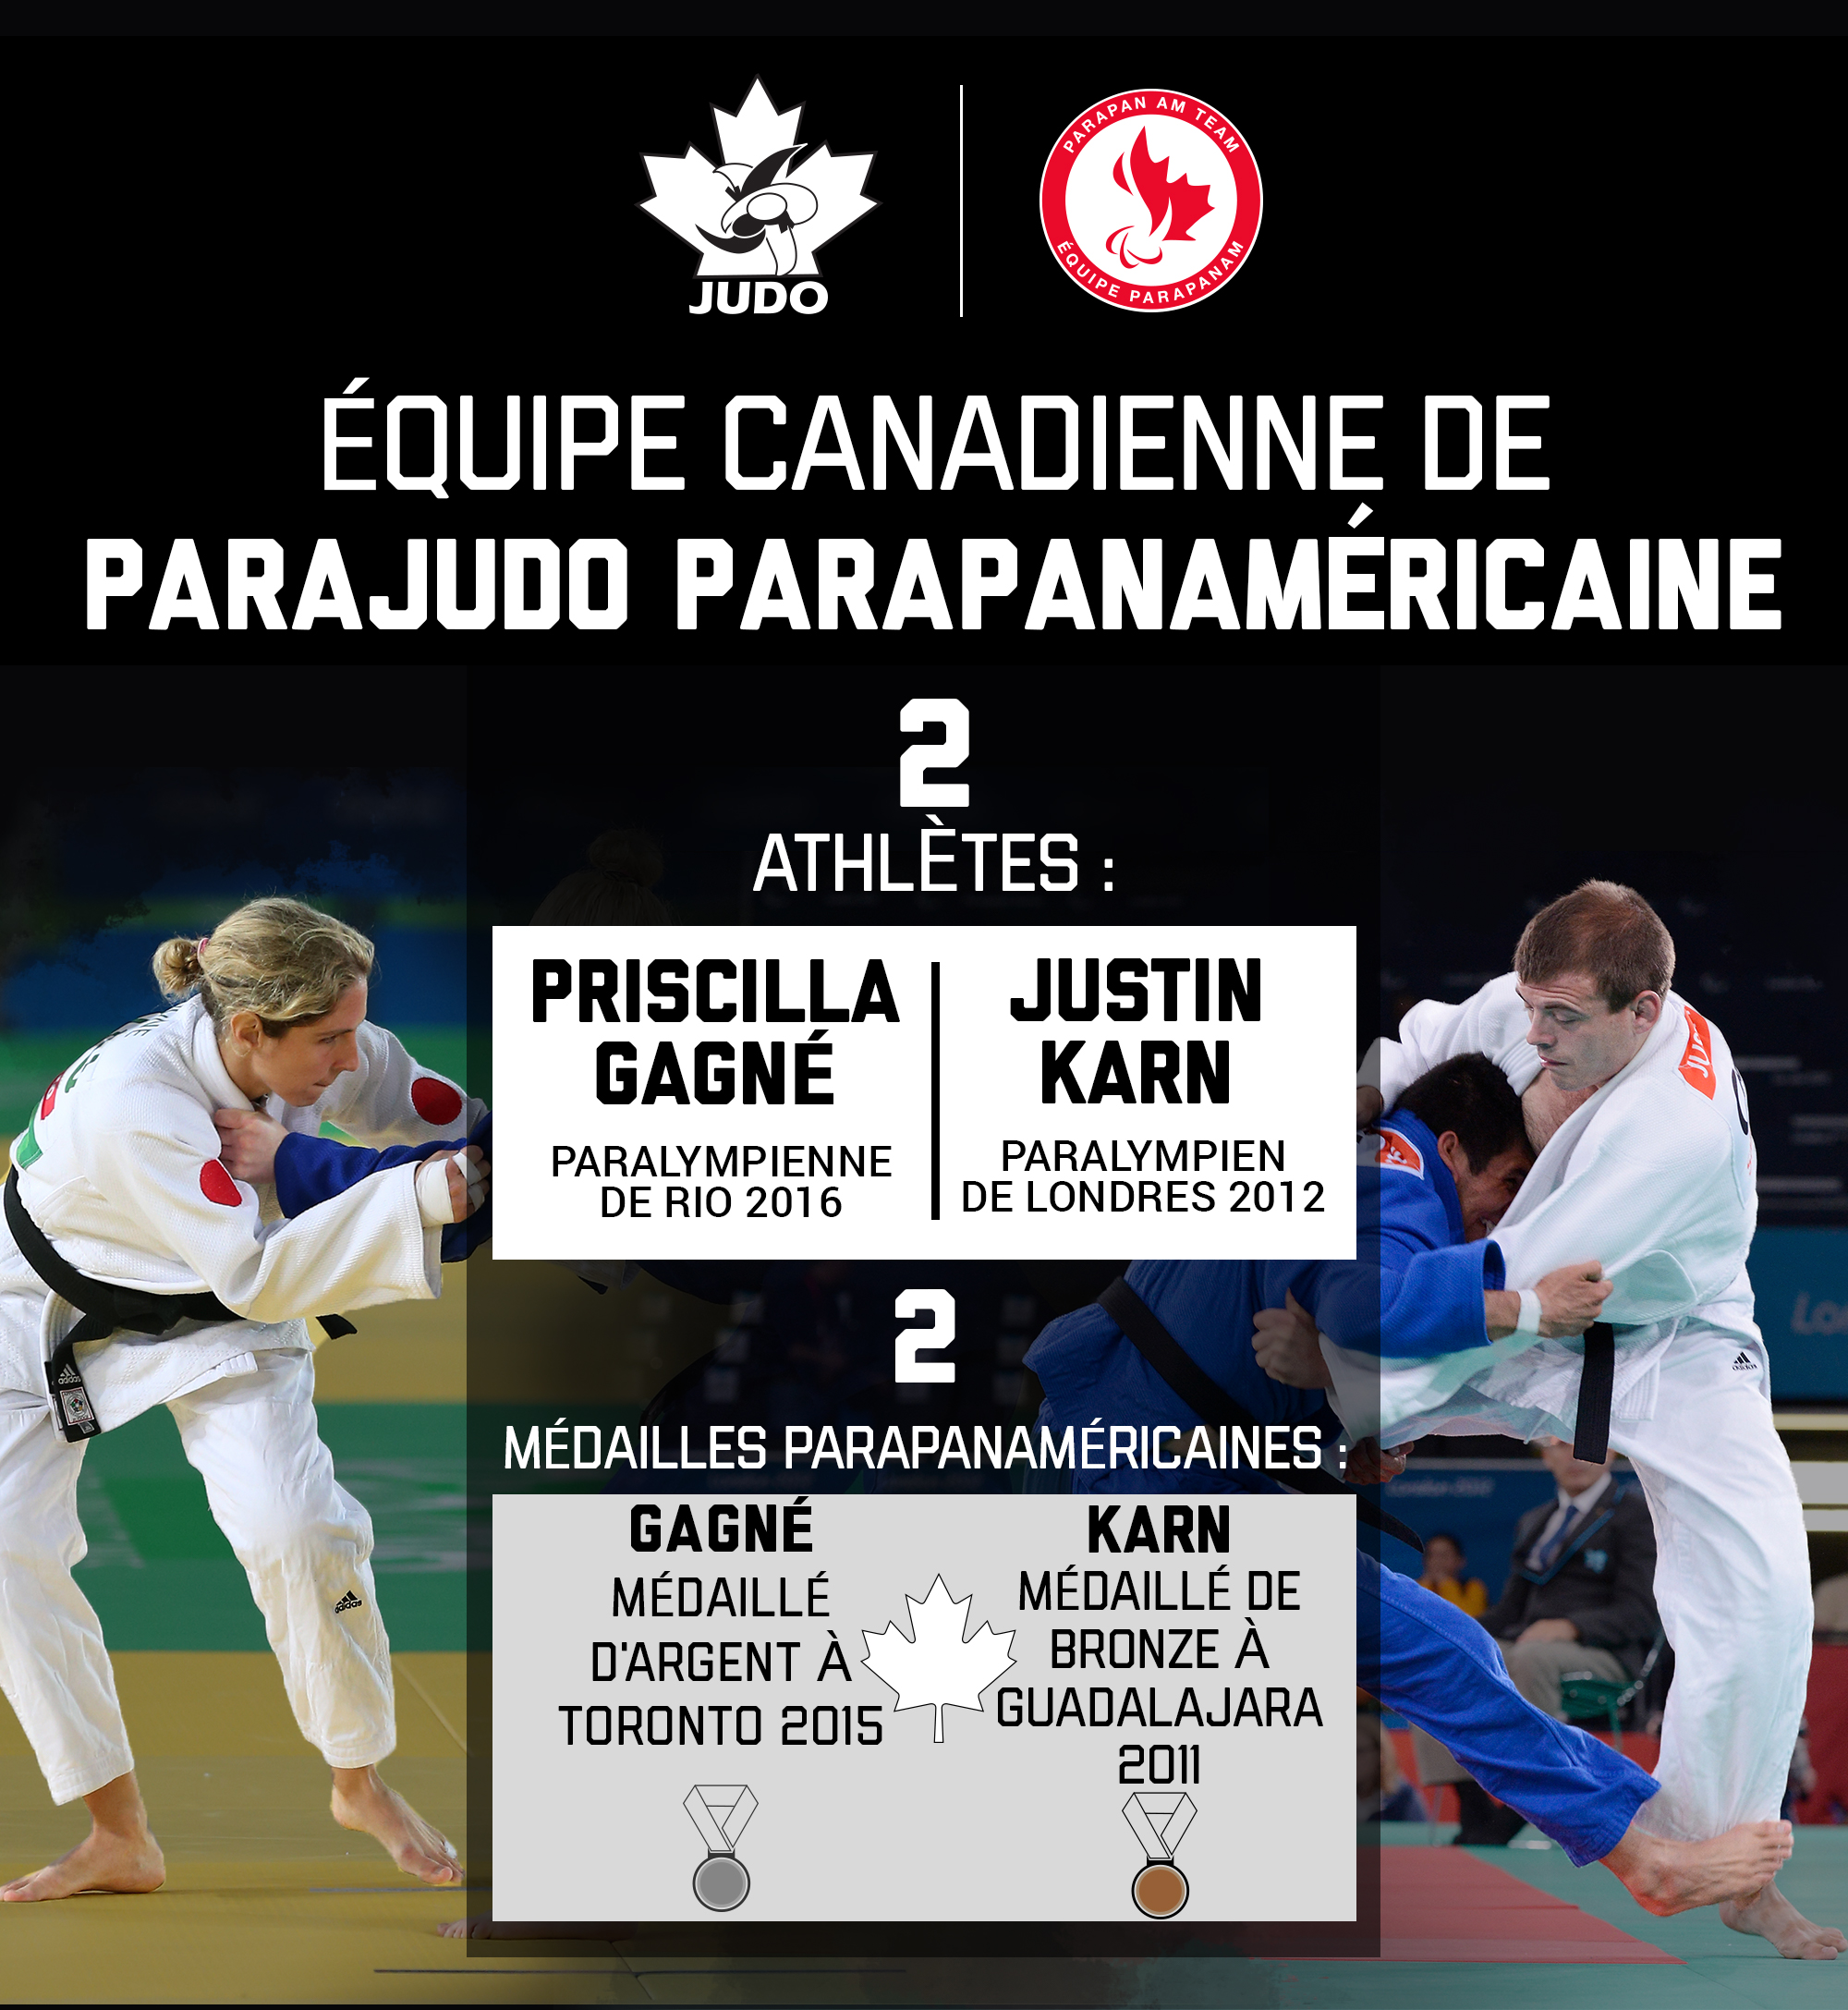 A graphic showing the make-up of the Canadian Parapan Am Judo Team. 